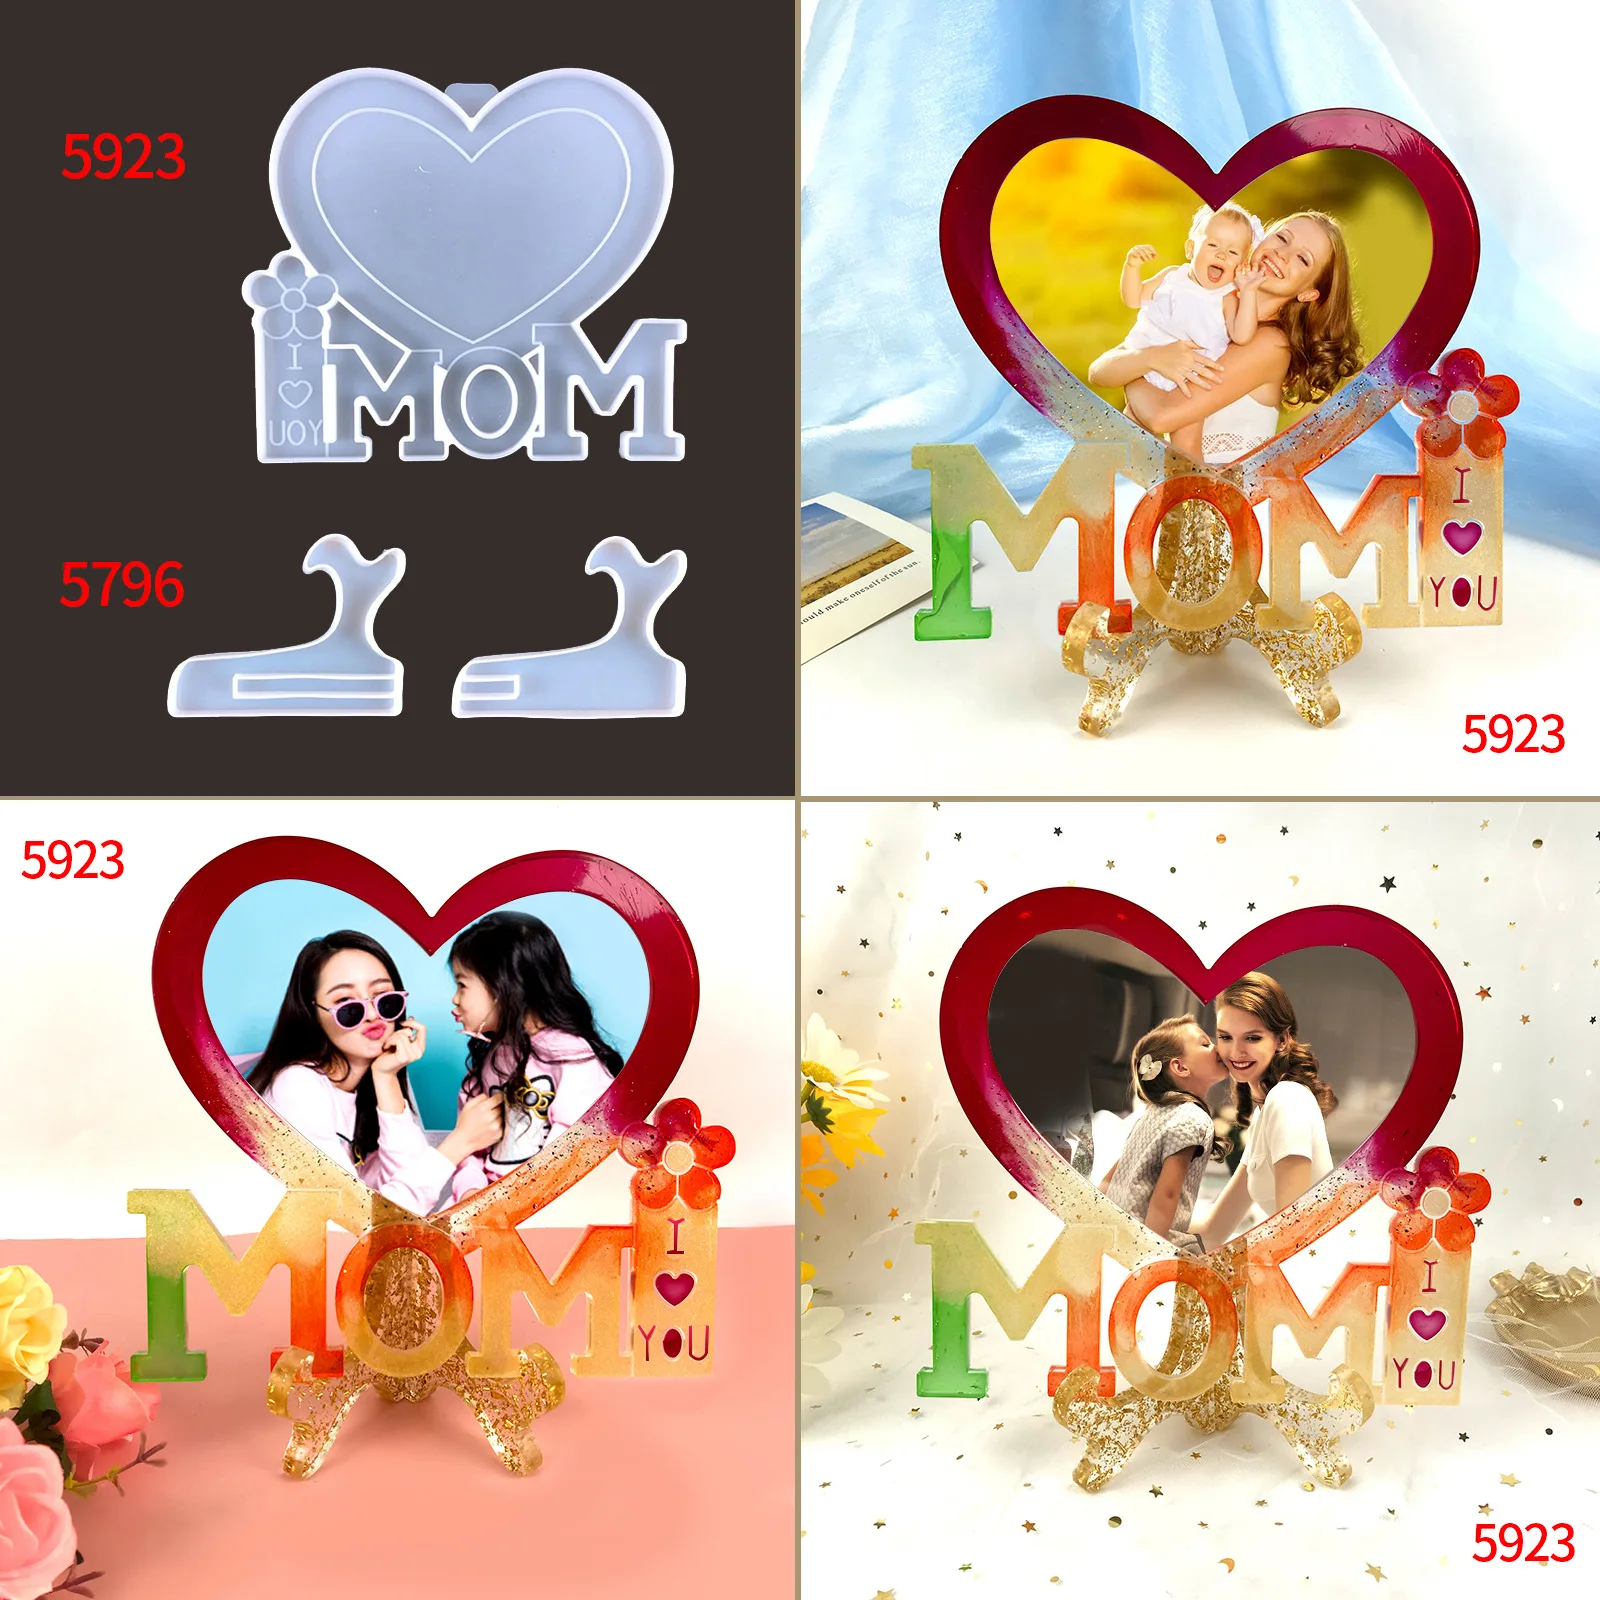 Love Heart Photo Frame Epoxy Mold For DIY Craft Mom Letter Resin Decorative Ornaments Craft Jewelry Making Mold Silicone Mould factory price 50pcs lot sublimation blank necklace ornaments key chain key ring heart shape diy craft heat press transfer